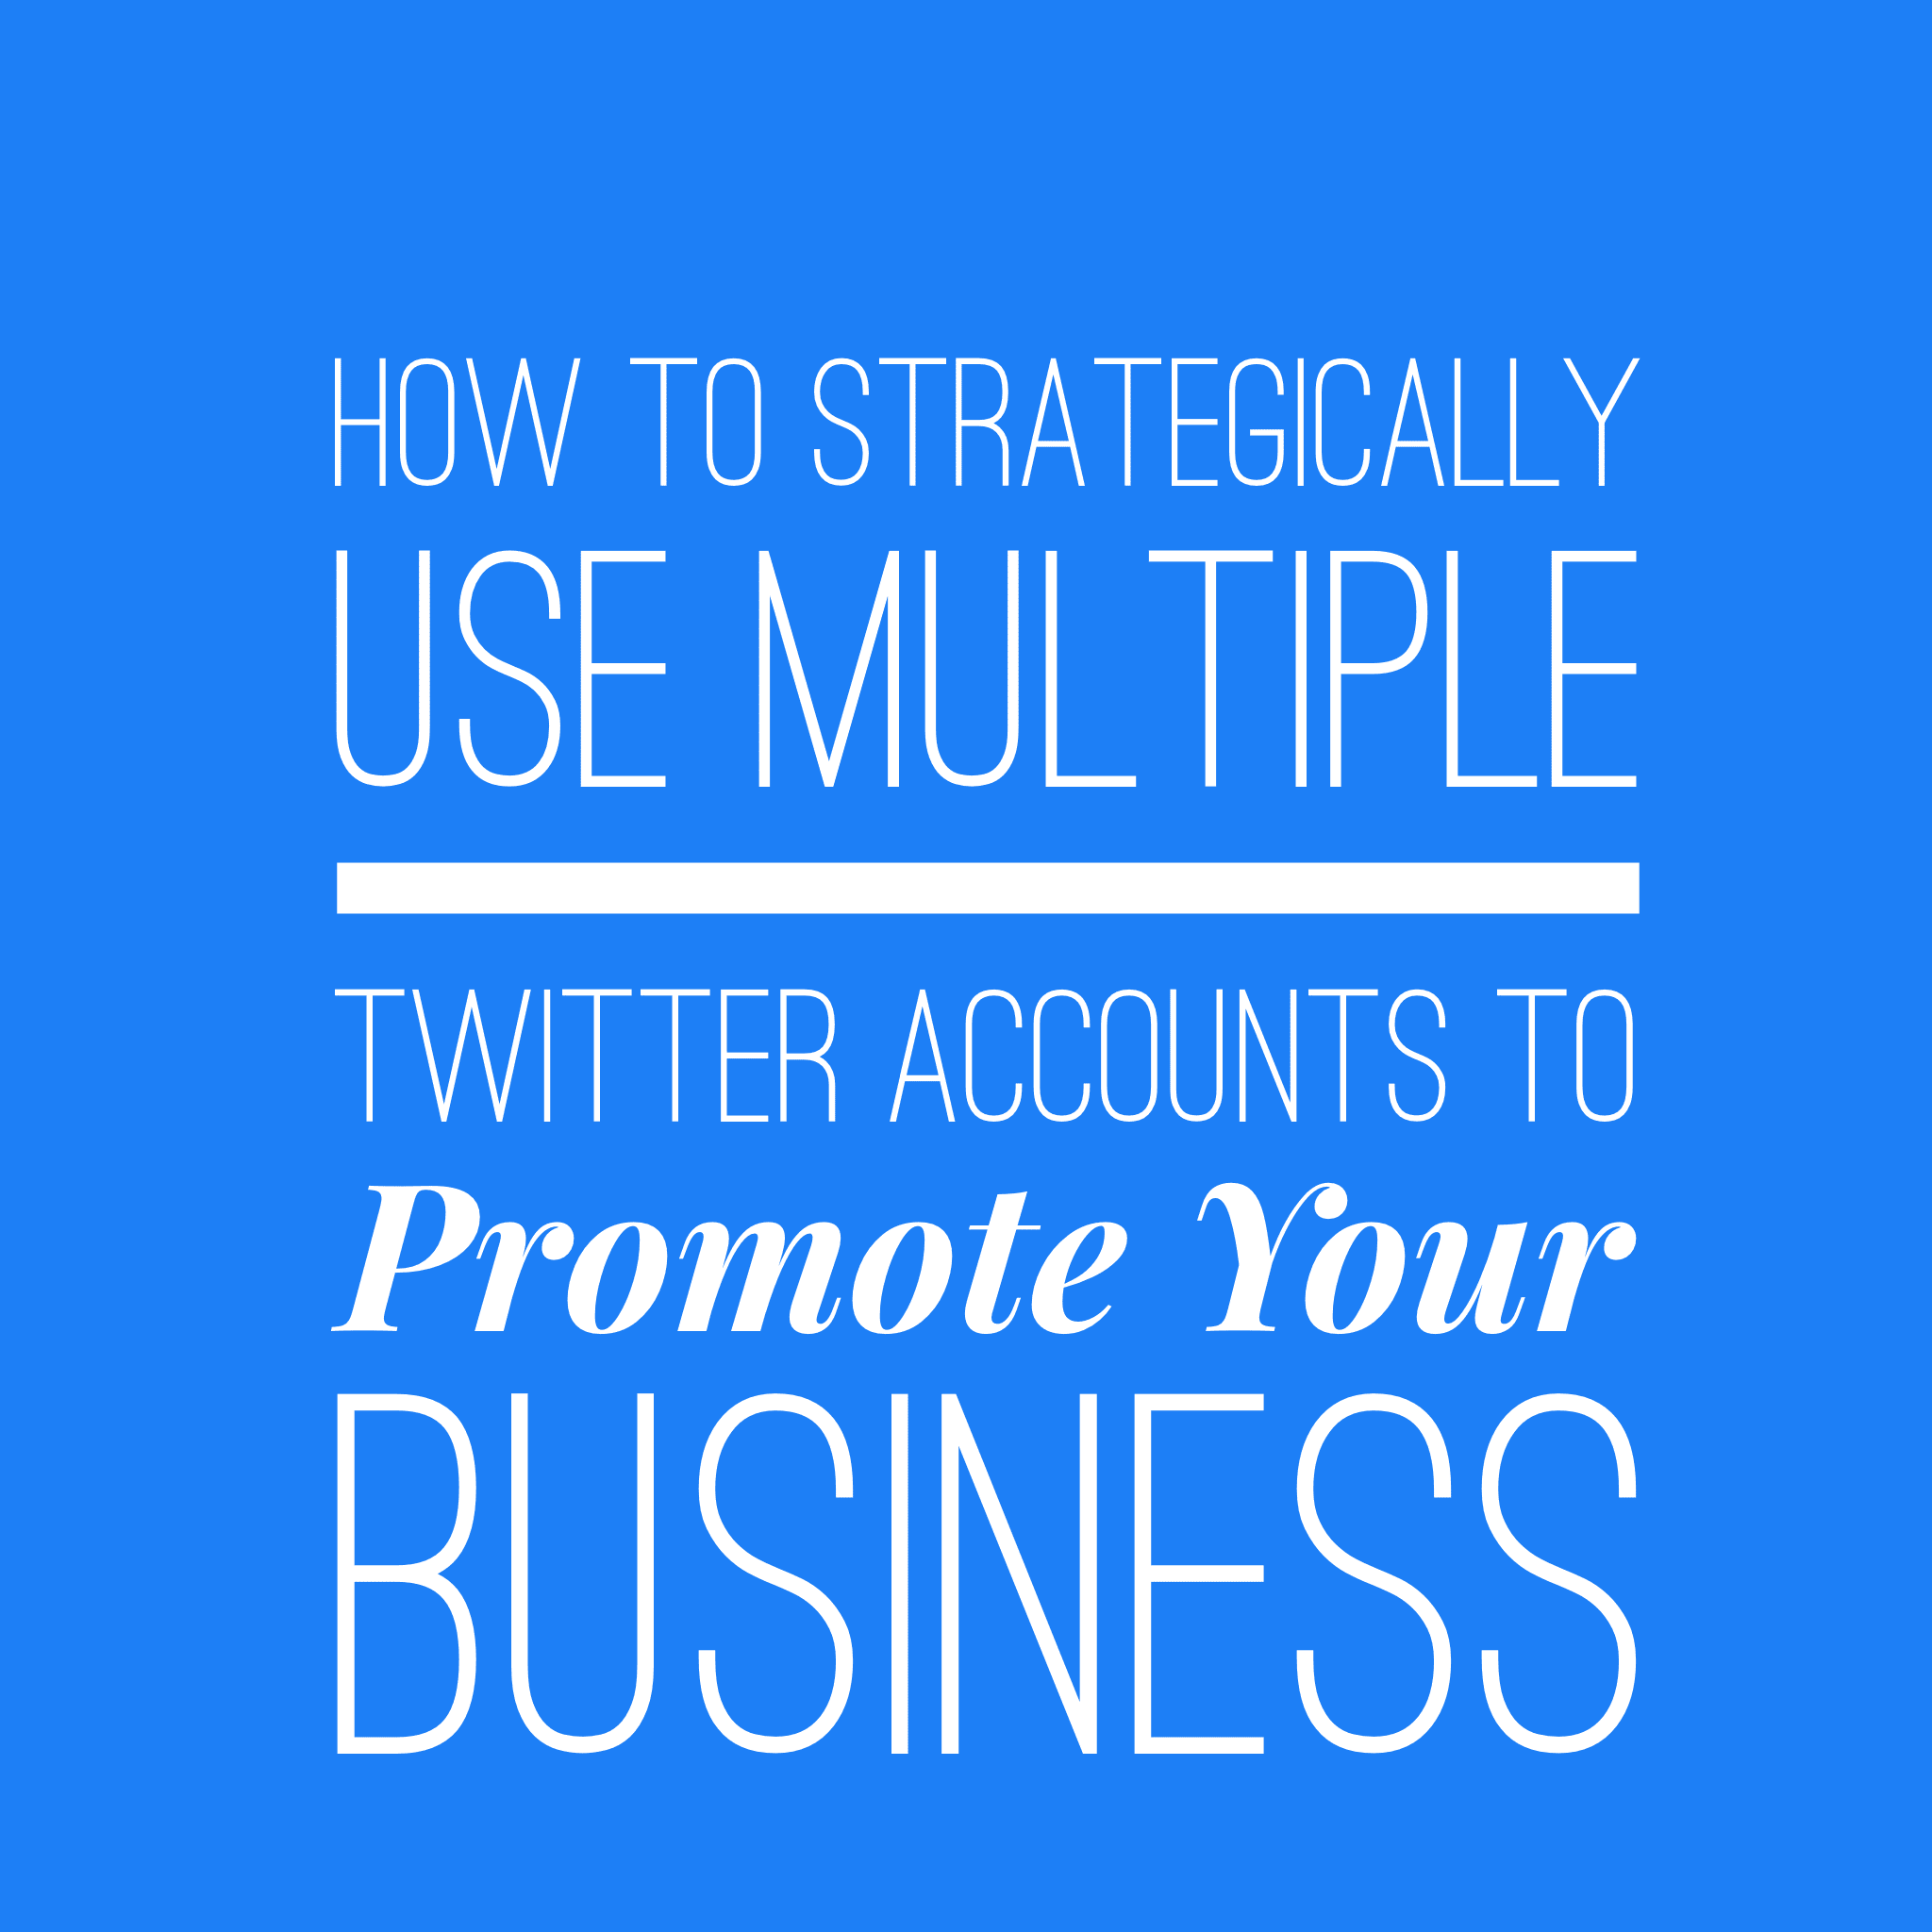 How To Strategically Use Multiple Twitter Accounts To Promote Your Business